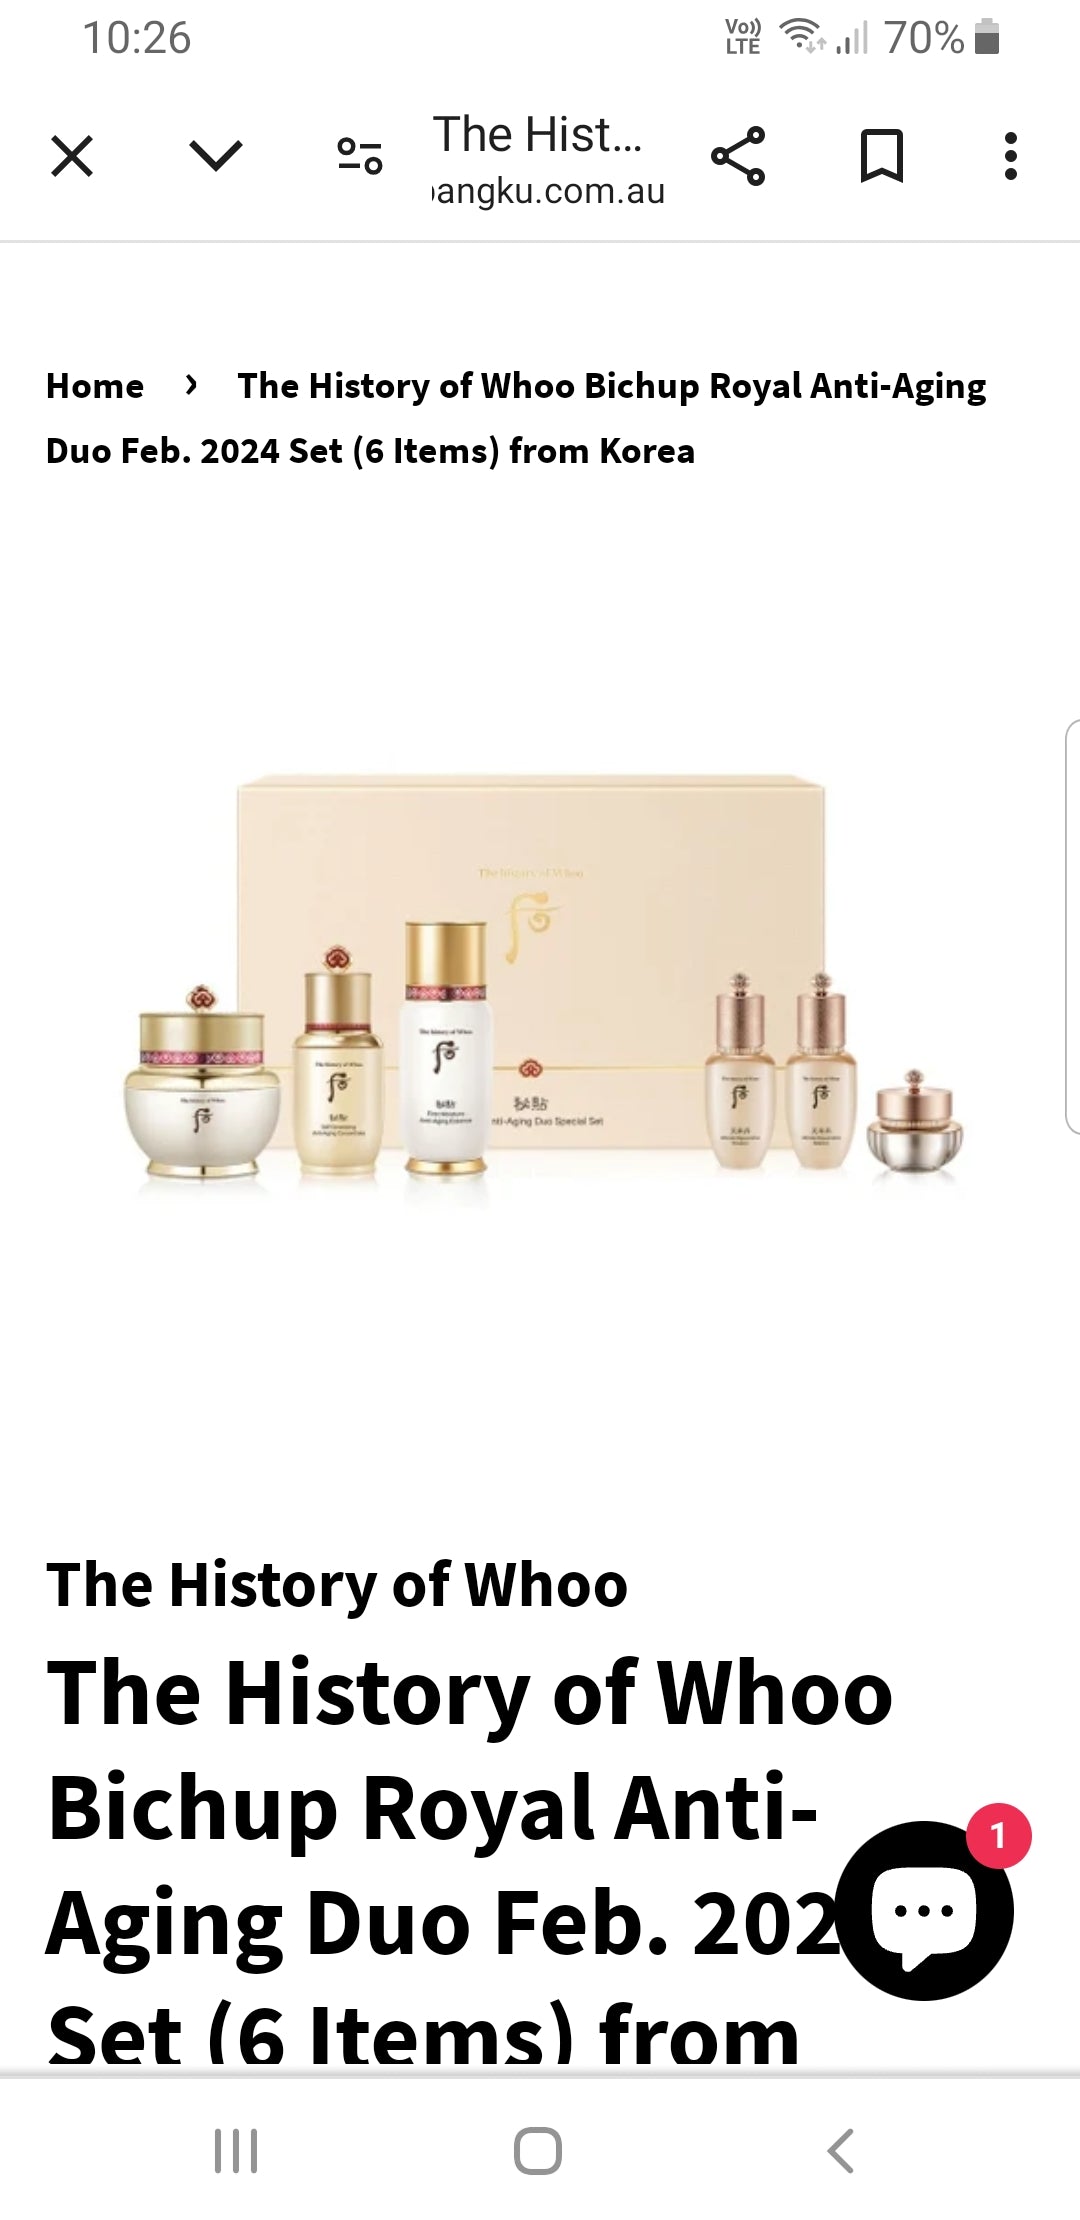 [K-beauty] The History of Whoo Bichup Royal Anti-Aging Duo Feb. 2024 Set (6 Items)